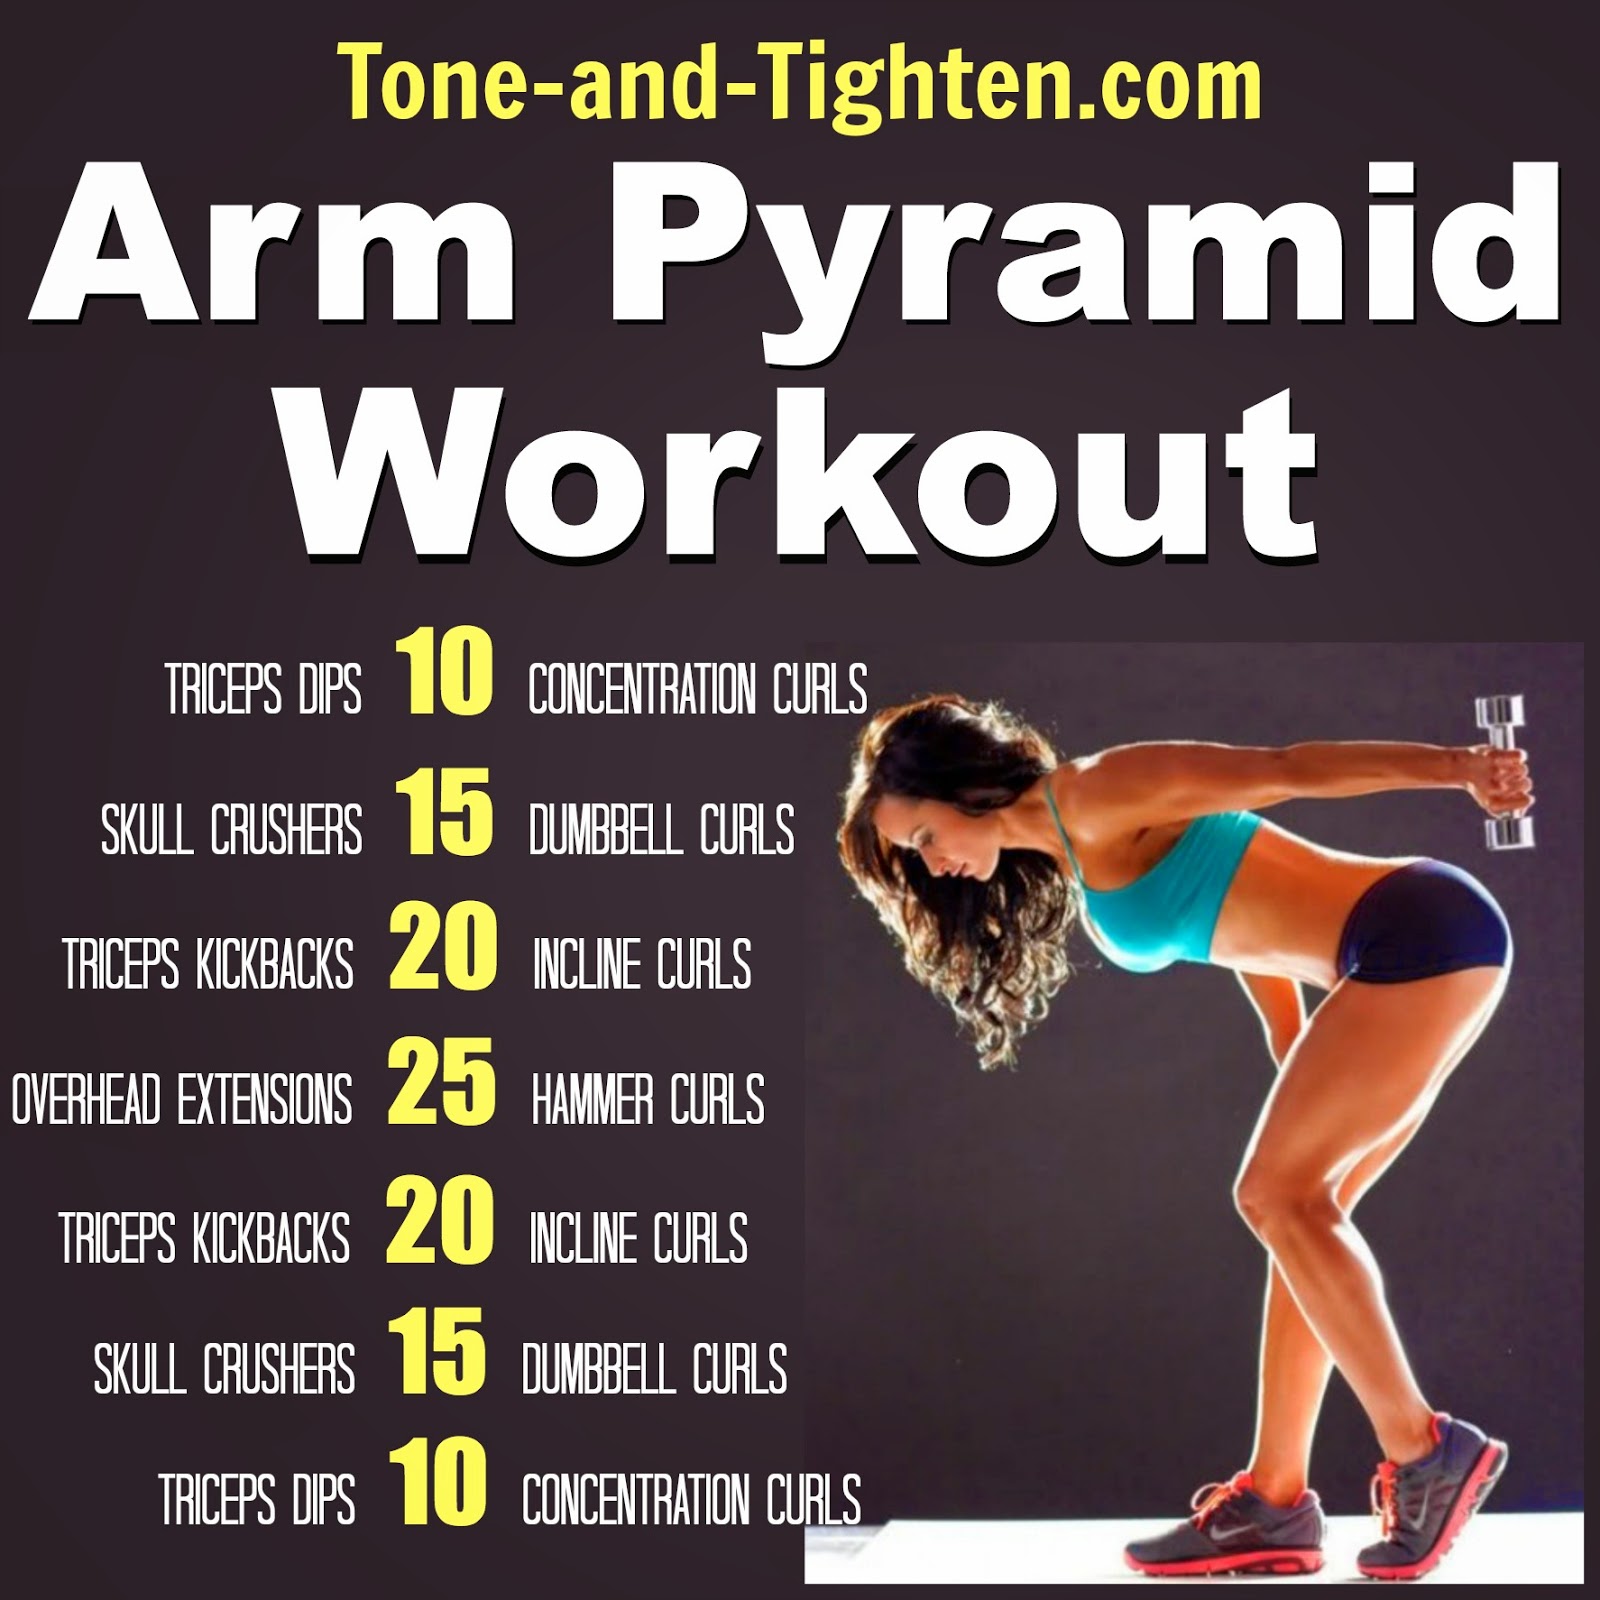 Arm Pyramid Workout – The best exercises to tone and tighten your arms!